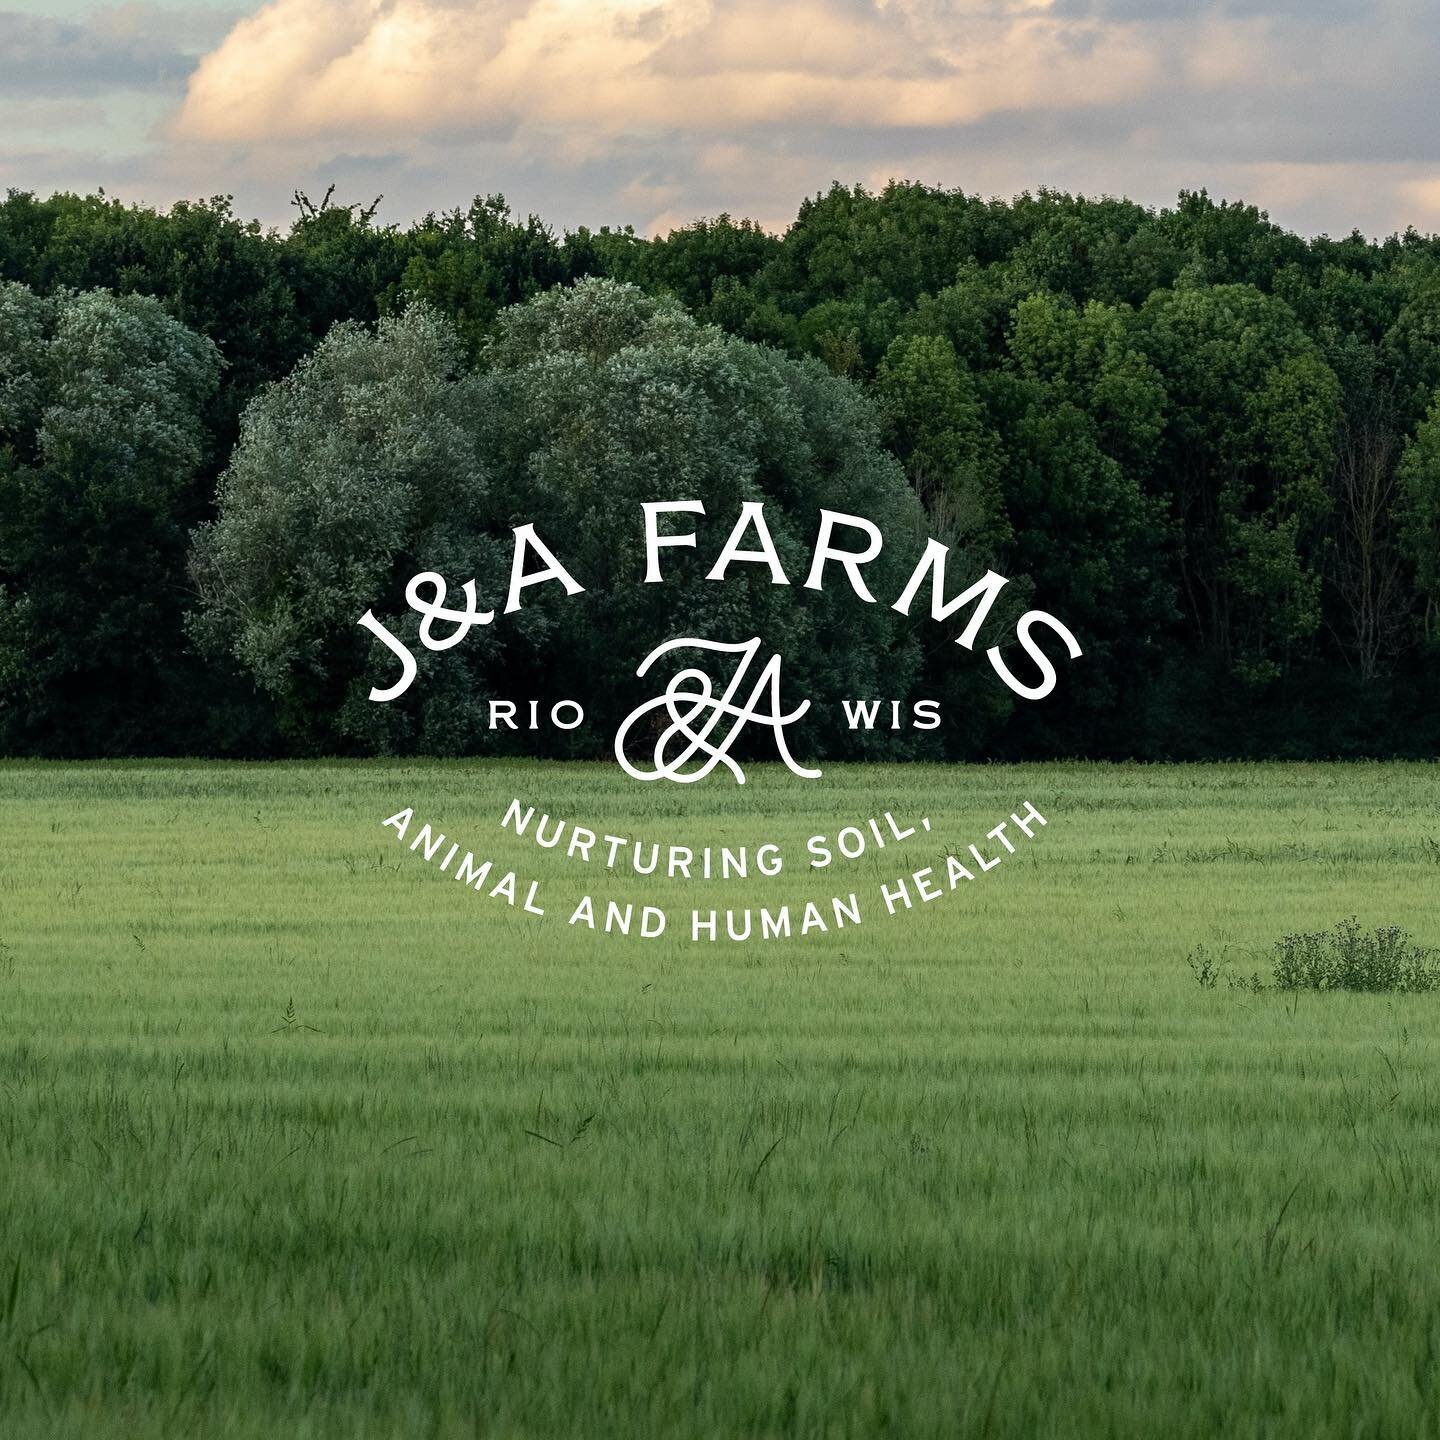 New branding work for @ja.farms 

John and Ashtyn are newlyweds who bought a farm in 2020, started raising and growing their herd of beef cows, and are living their dream of regenerative farming in Rio, Wisconsin. They really wanted to hit the ground